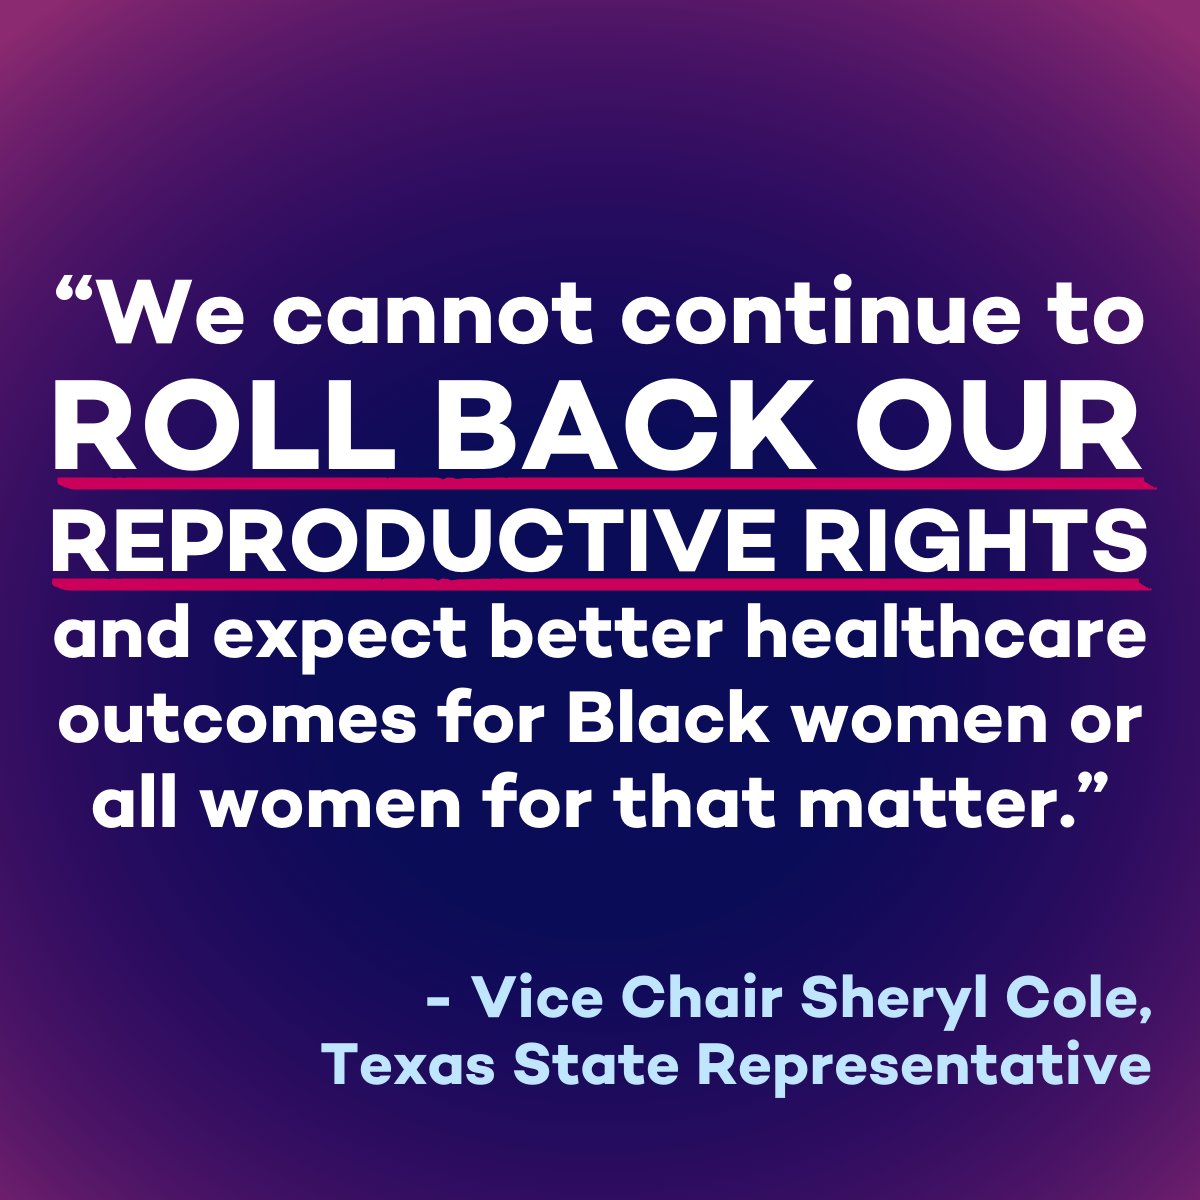 'We cannot continue to roll back our reproductive rights and expect better healthcare outcomes for Black women or all women for that matter.' - Vice Chair @SherylCole1, Texas State Representative